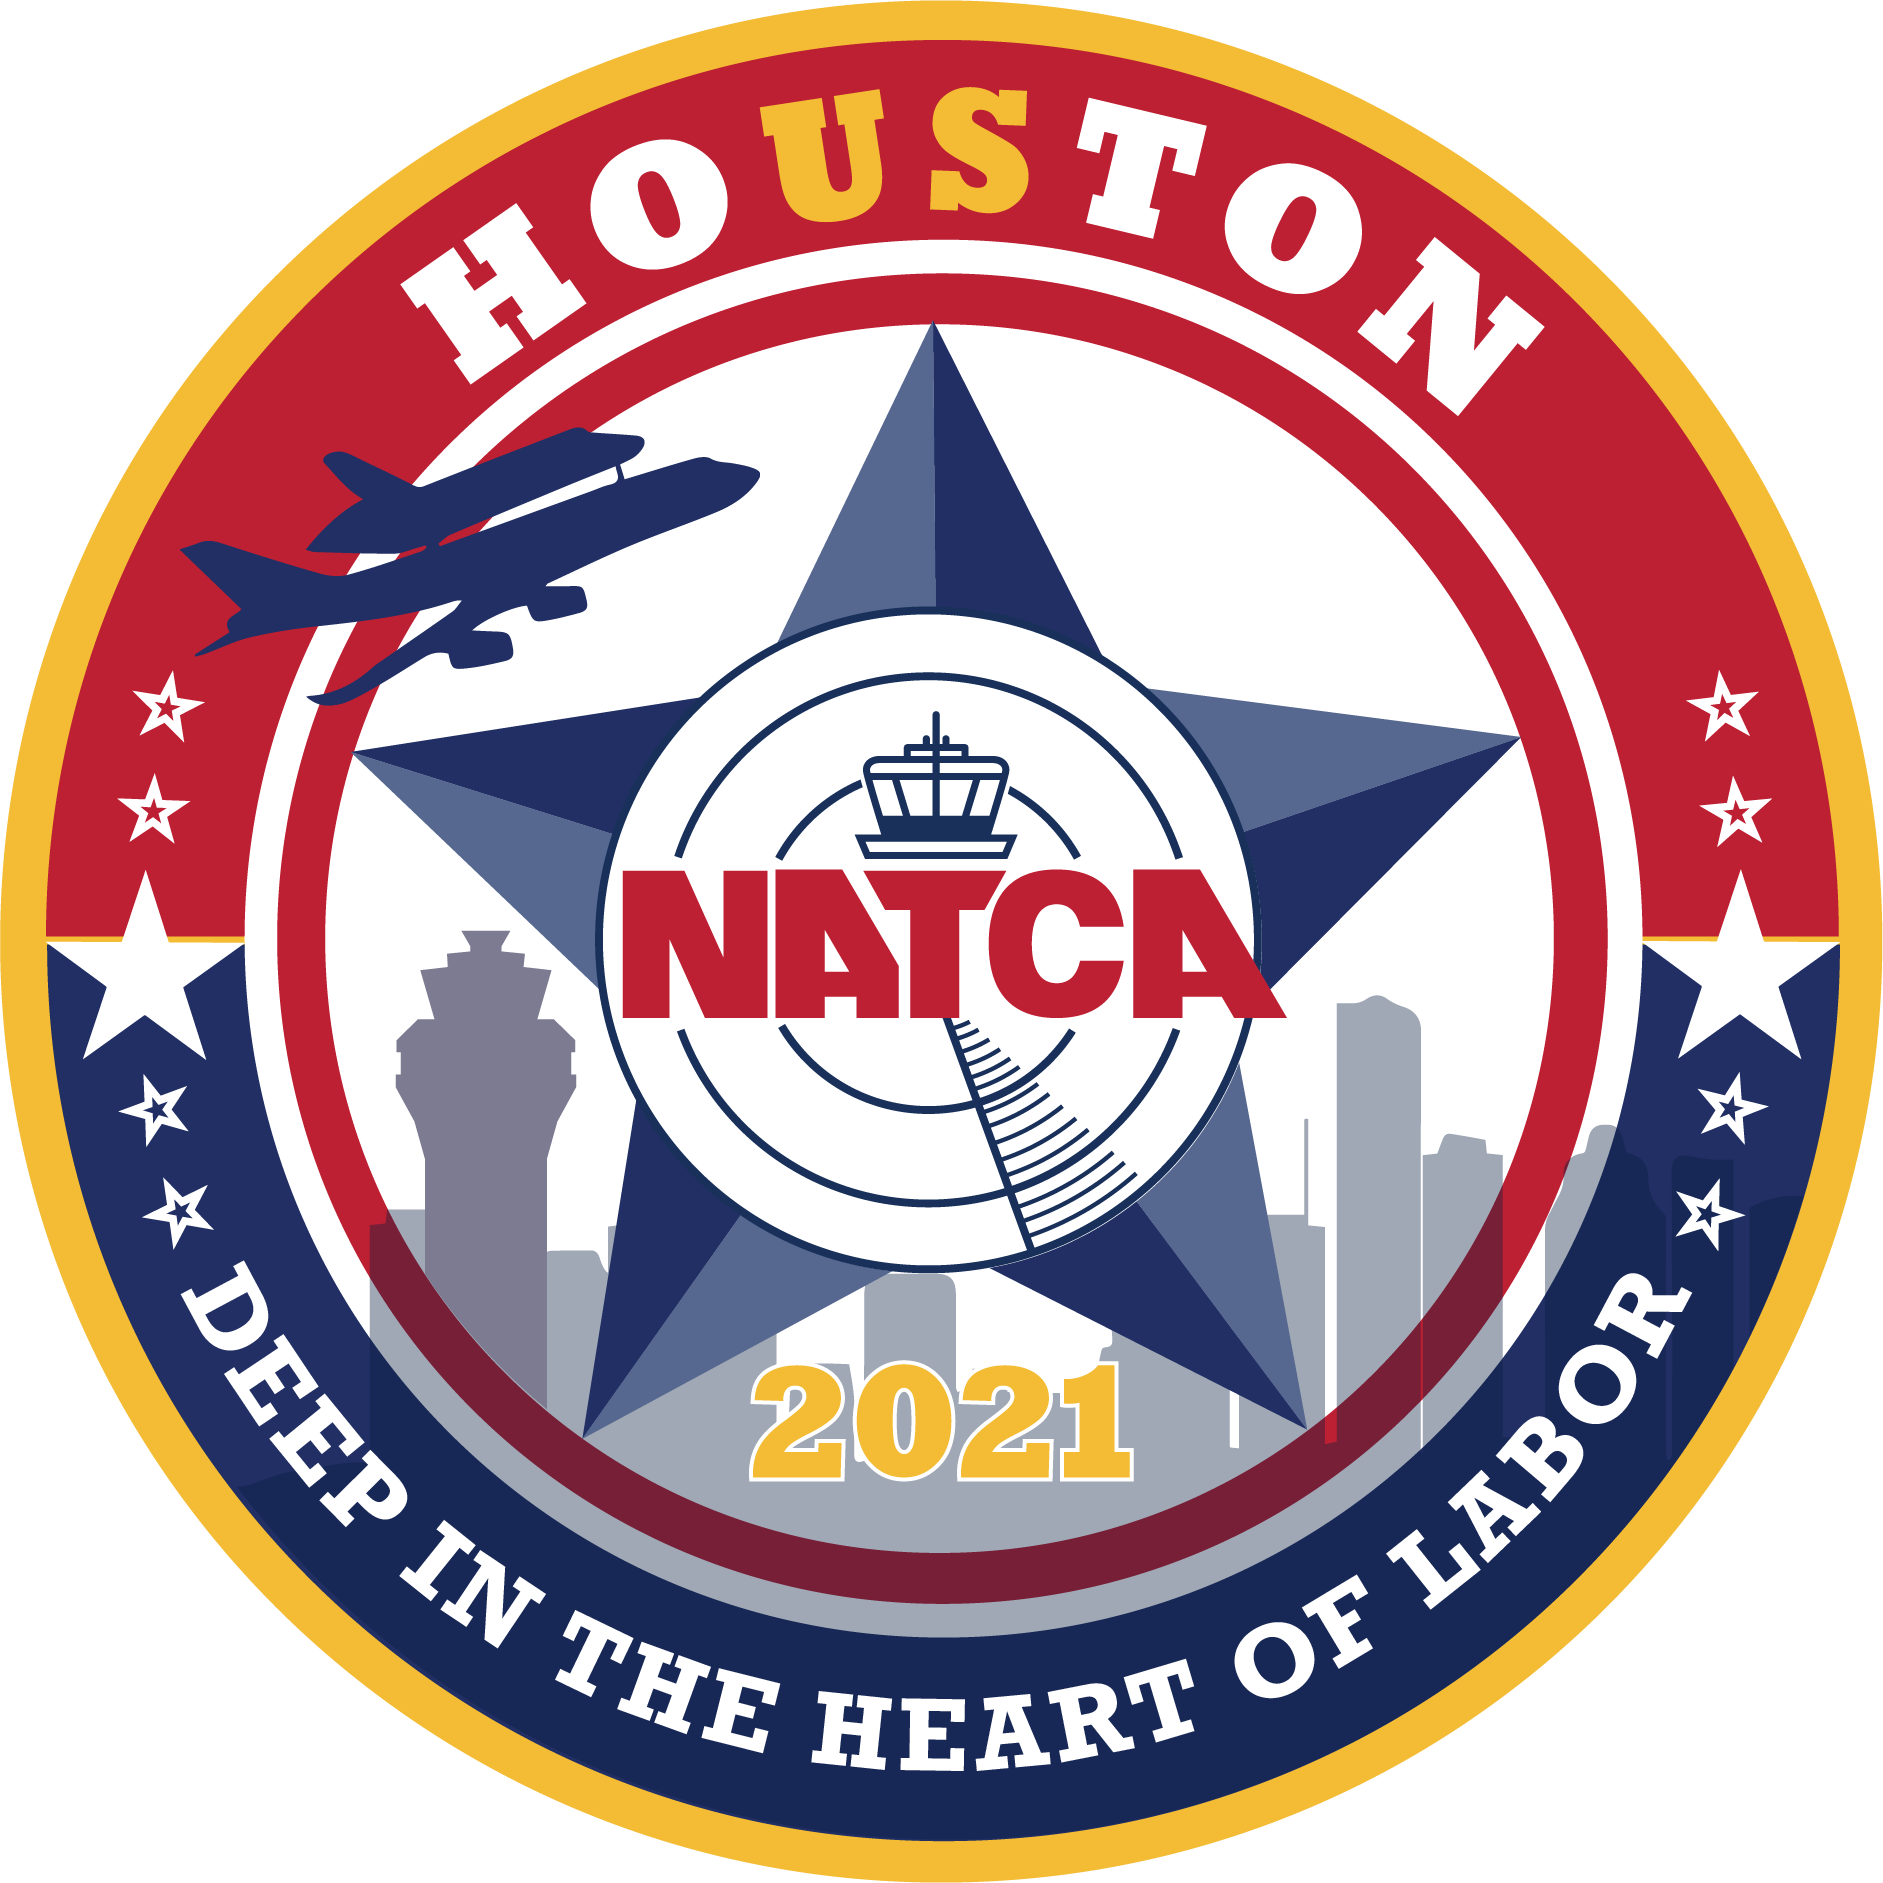 Thank You Houston Convention Committee! NATCA